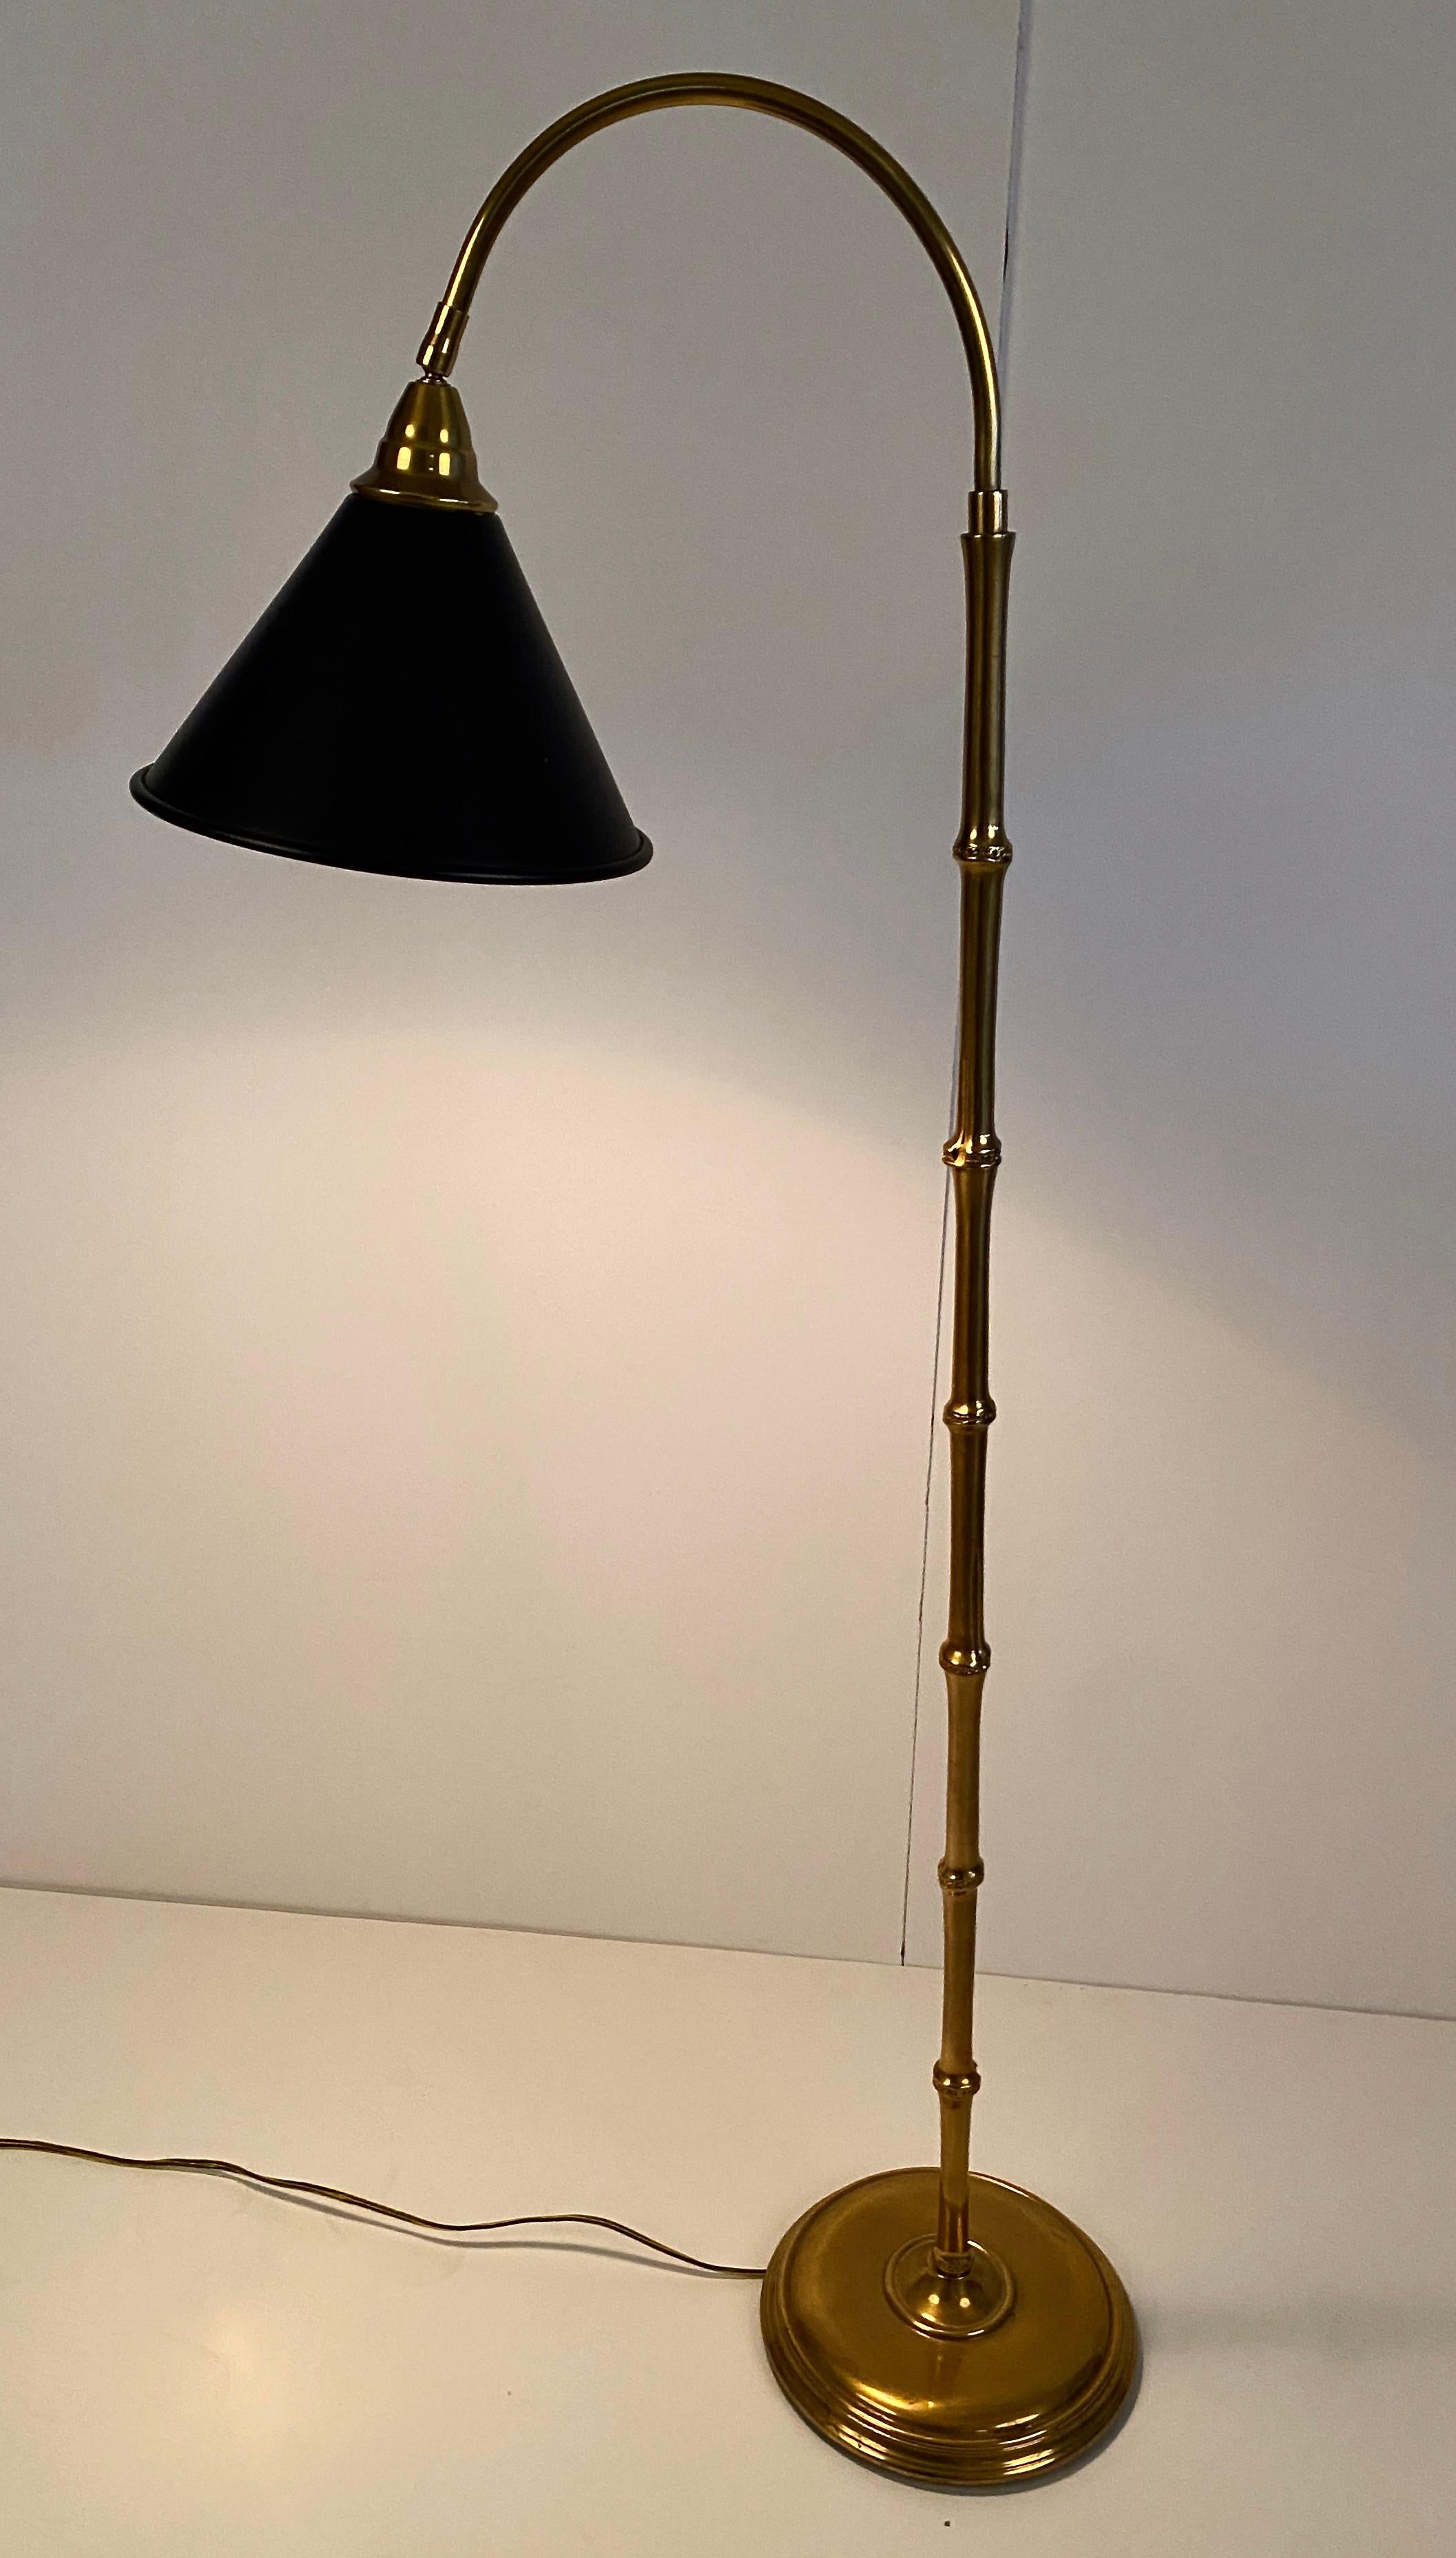 Handsome standing lamp with great functionality, designed by Mario Buatta for Frederick Cooper. Substantial brass base with elegant faux bamboo rod curves to hold a conical metal shade. The shade is attached to the lamp by a universal joint which